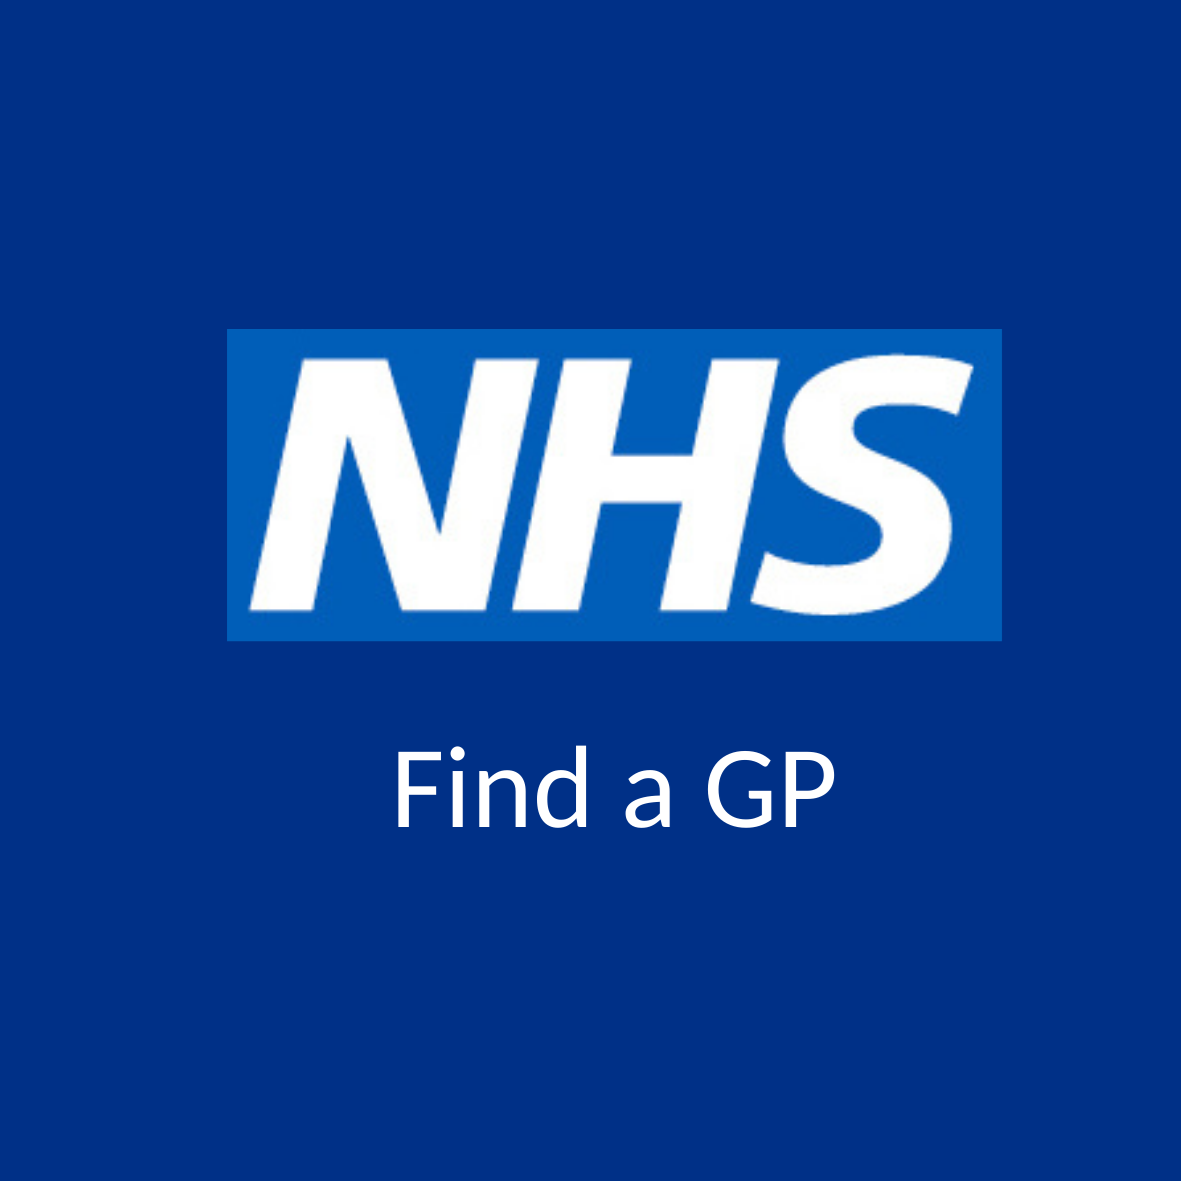 NHS Logo With Words 'Find a GP